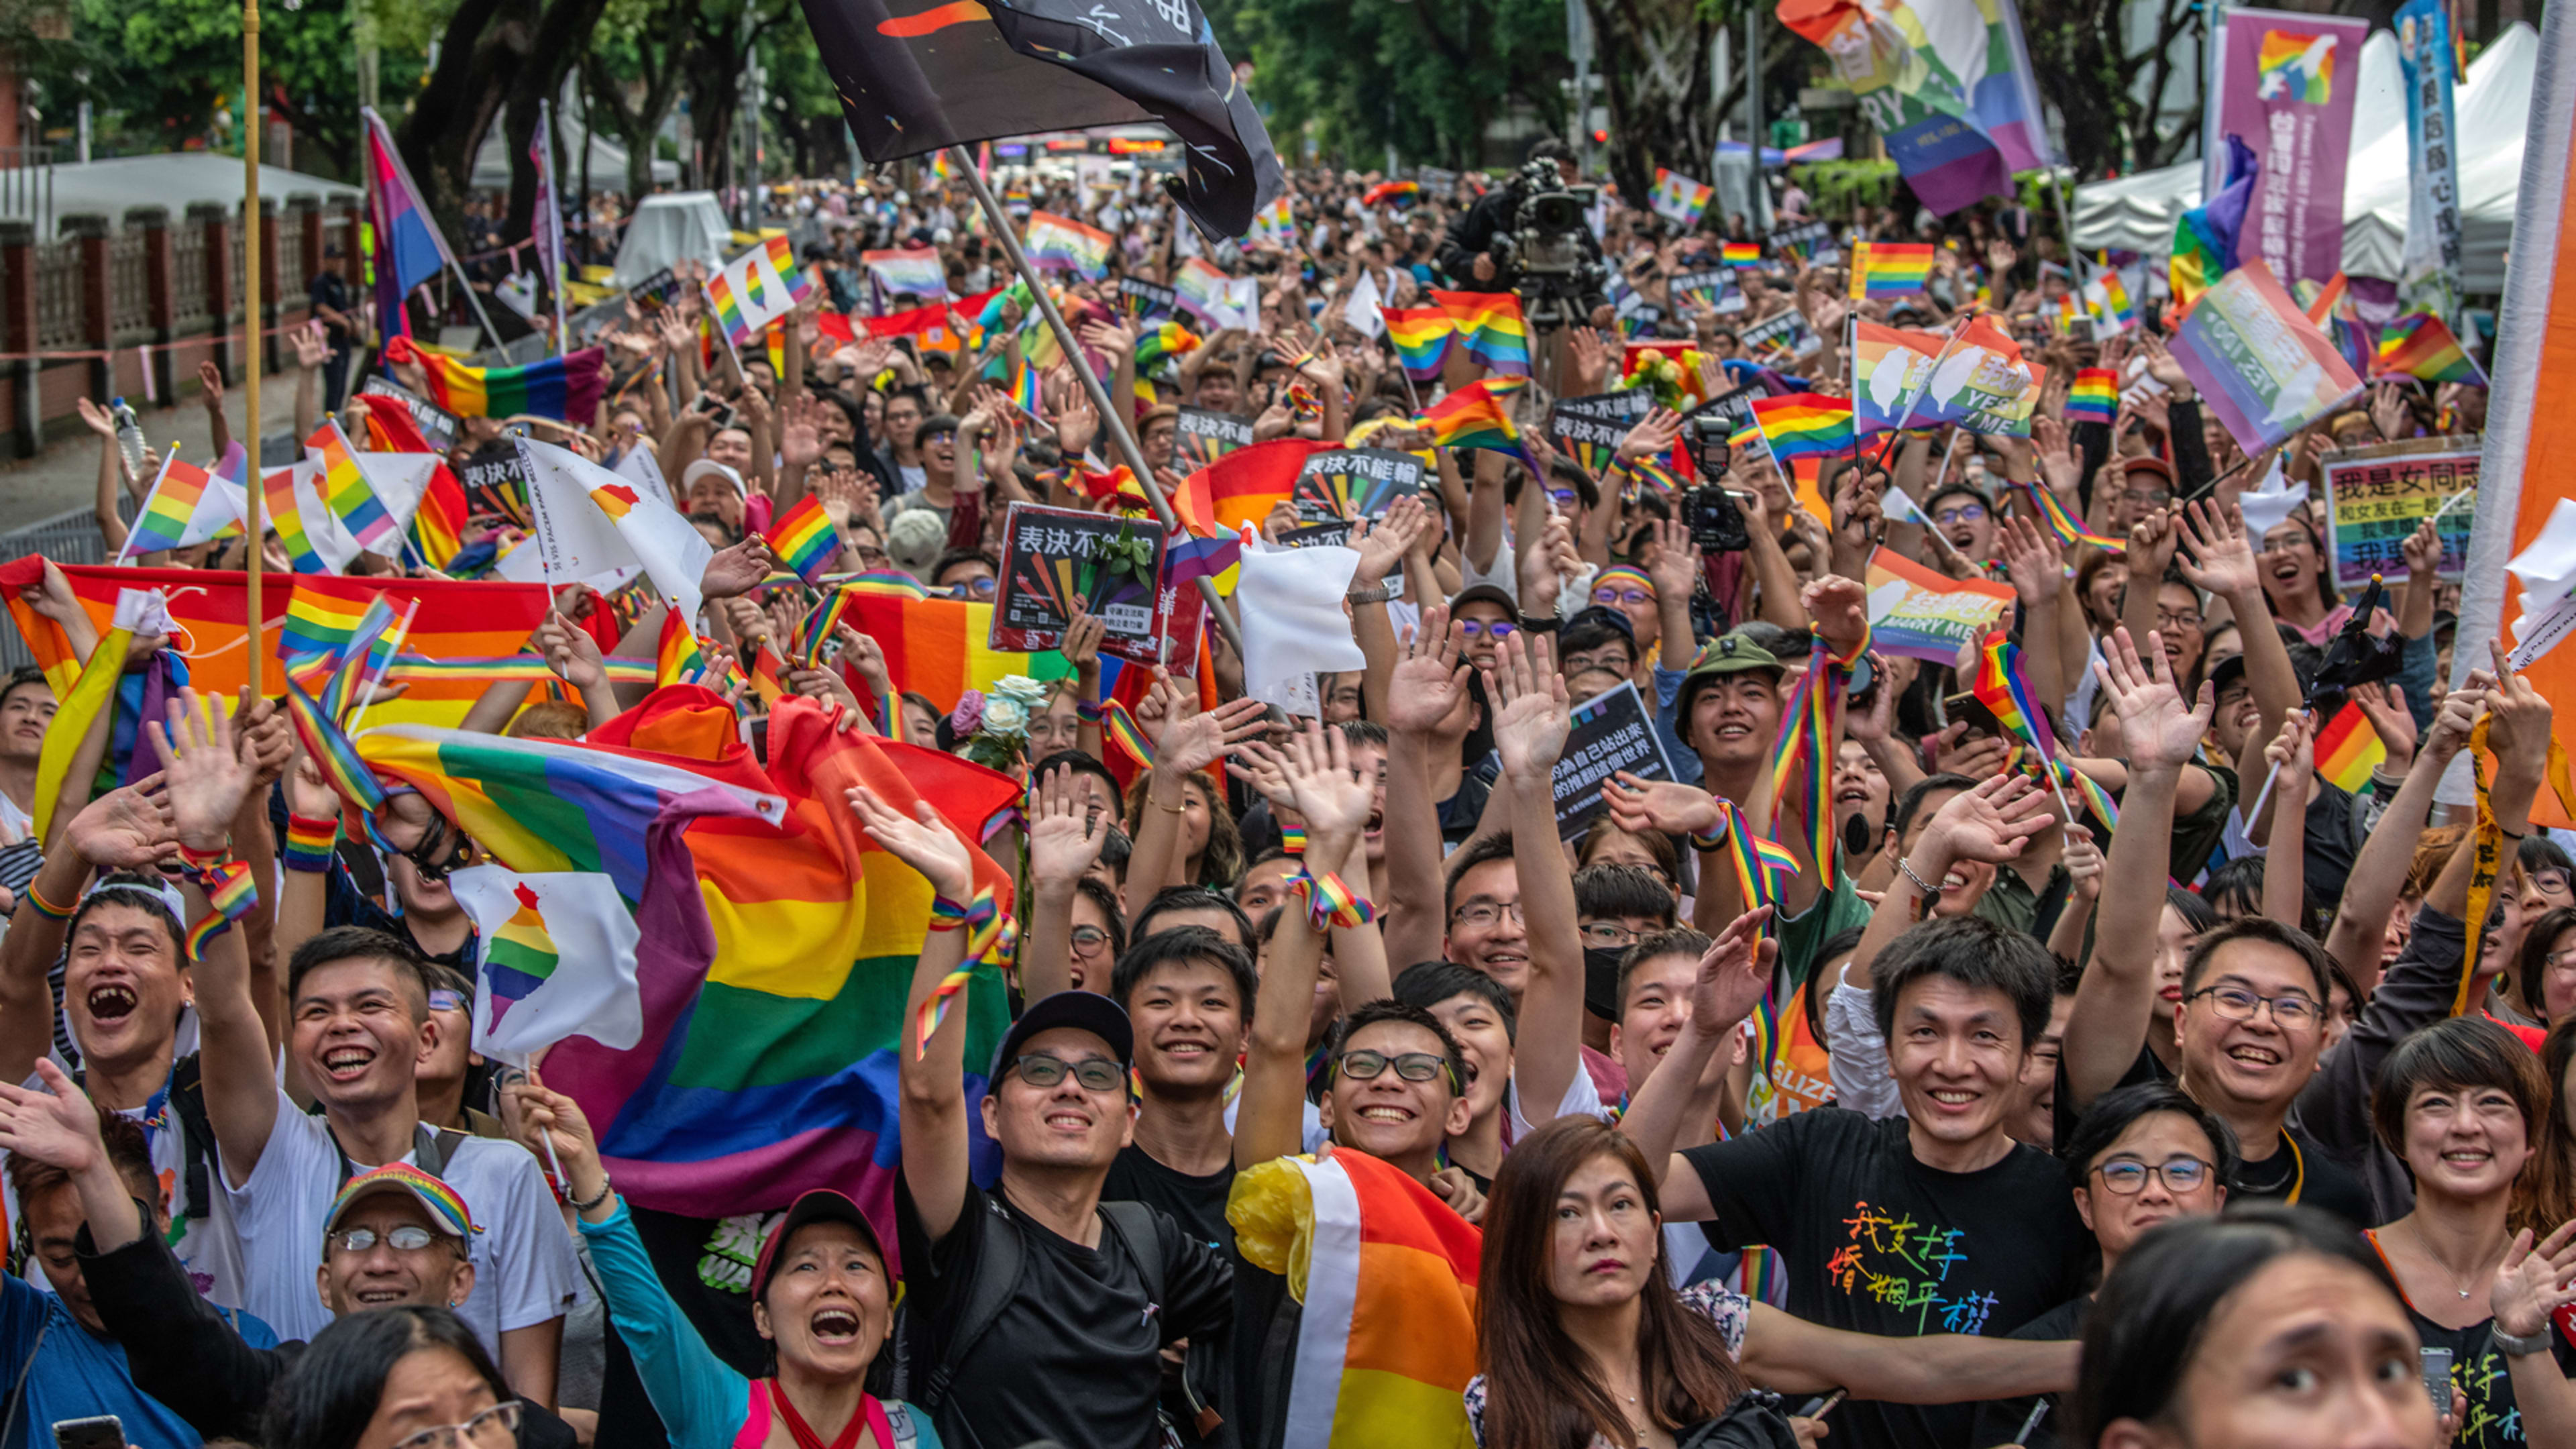 Taiwan just legalized same-sex marriage, a historic first for Asia